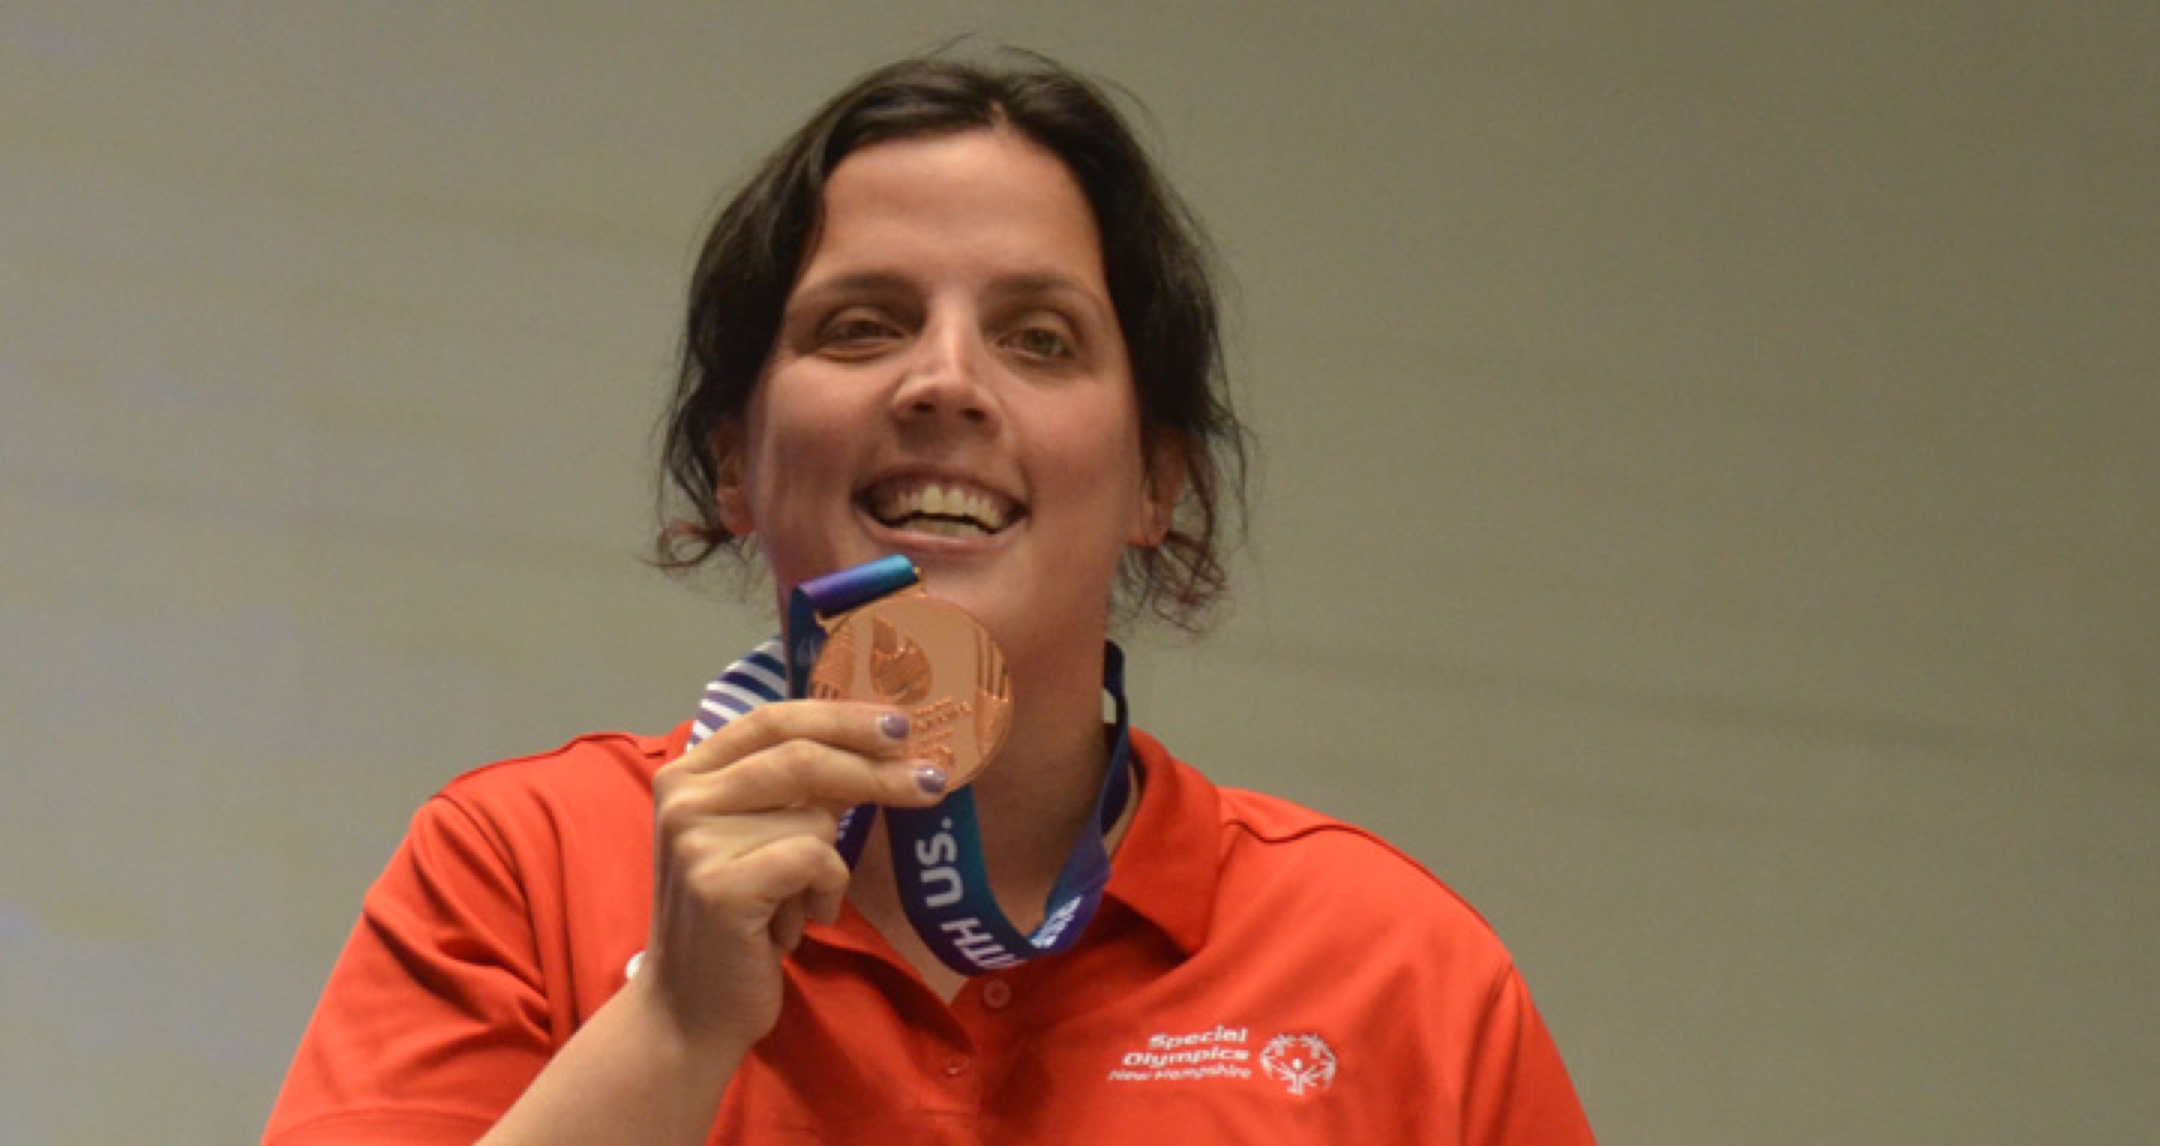 Athlete proudly smiling while holding up a medal